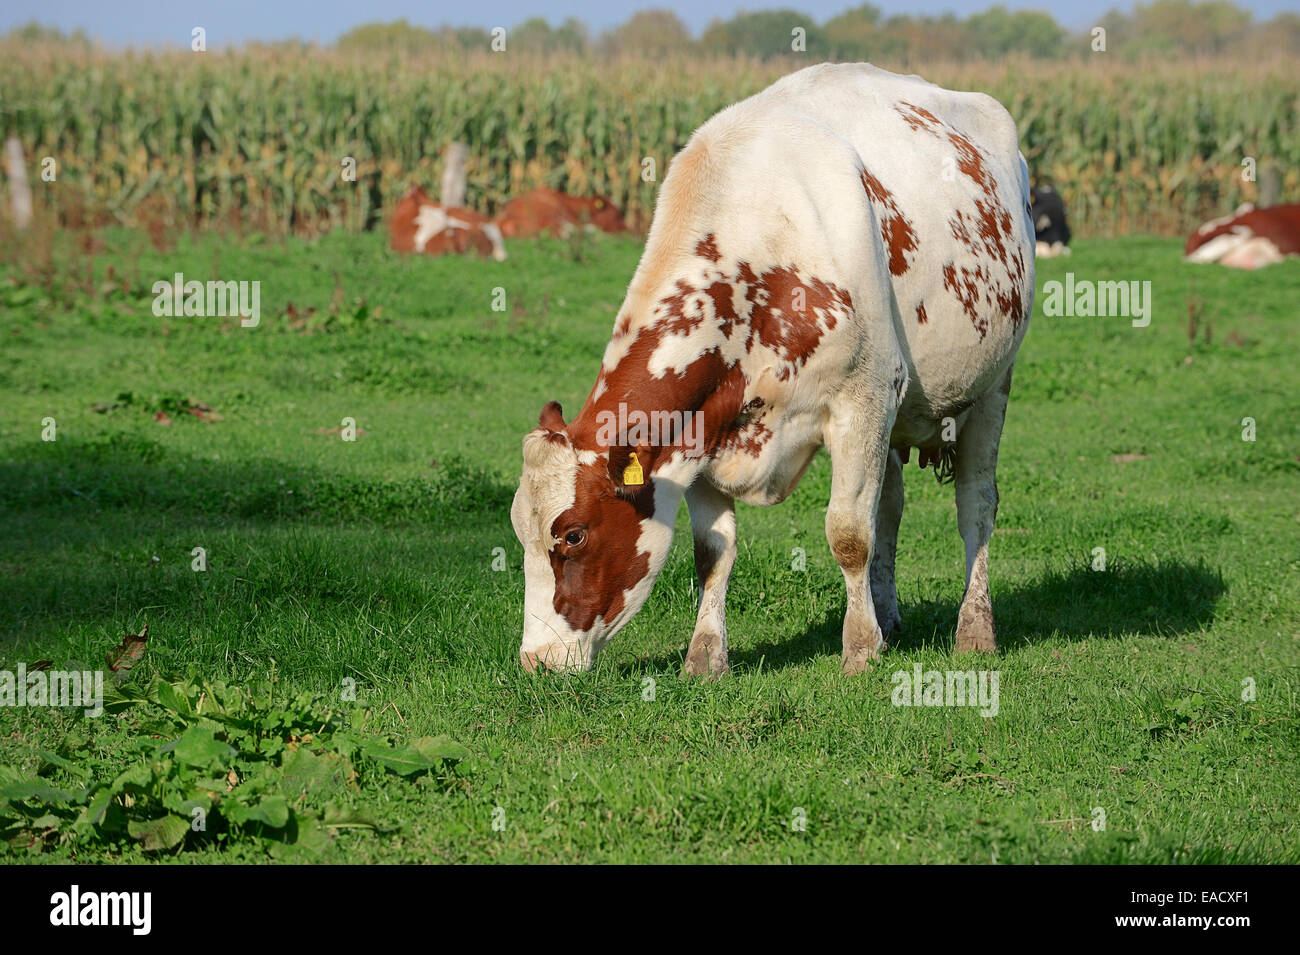 German red and white Holstein cattle (Bos primigenius taurus), cow grazing on a pasture, North Rhine-Westphalia, Germany Stock Photo